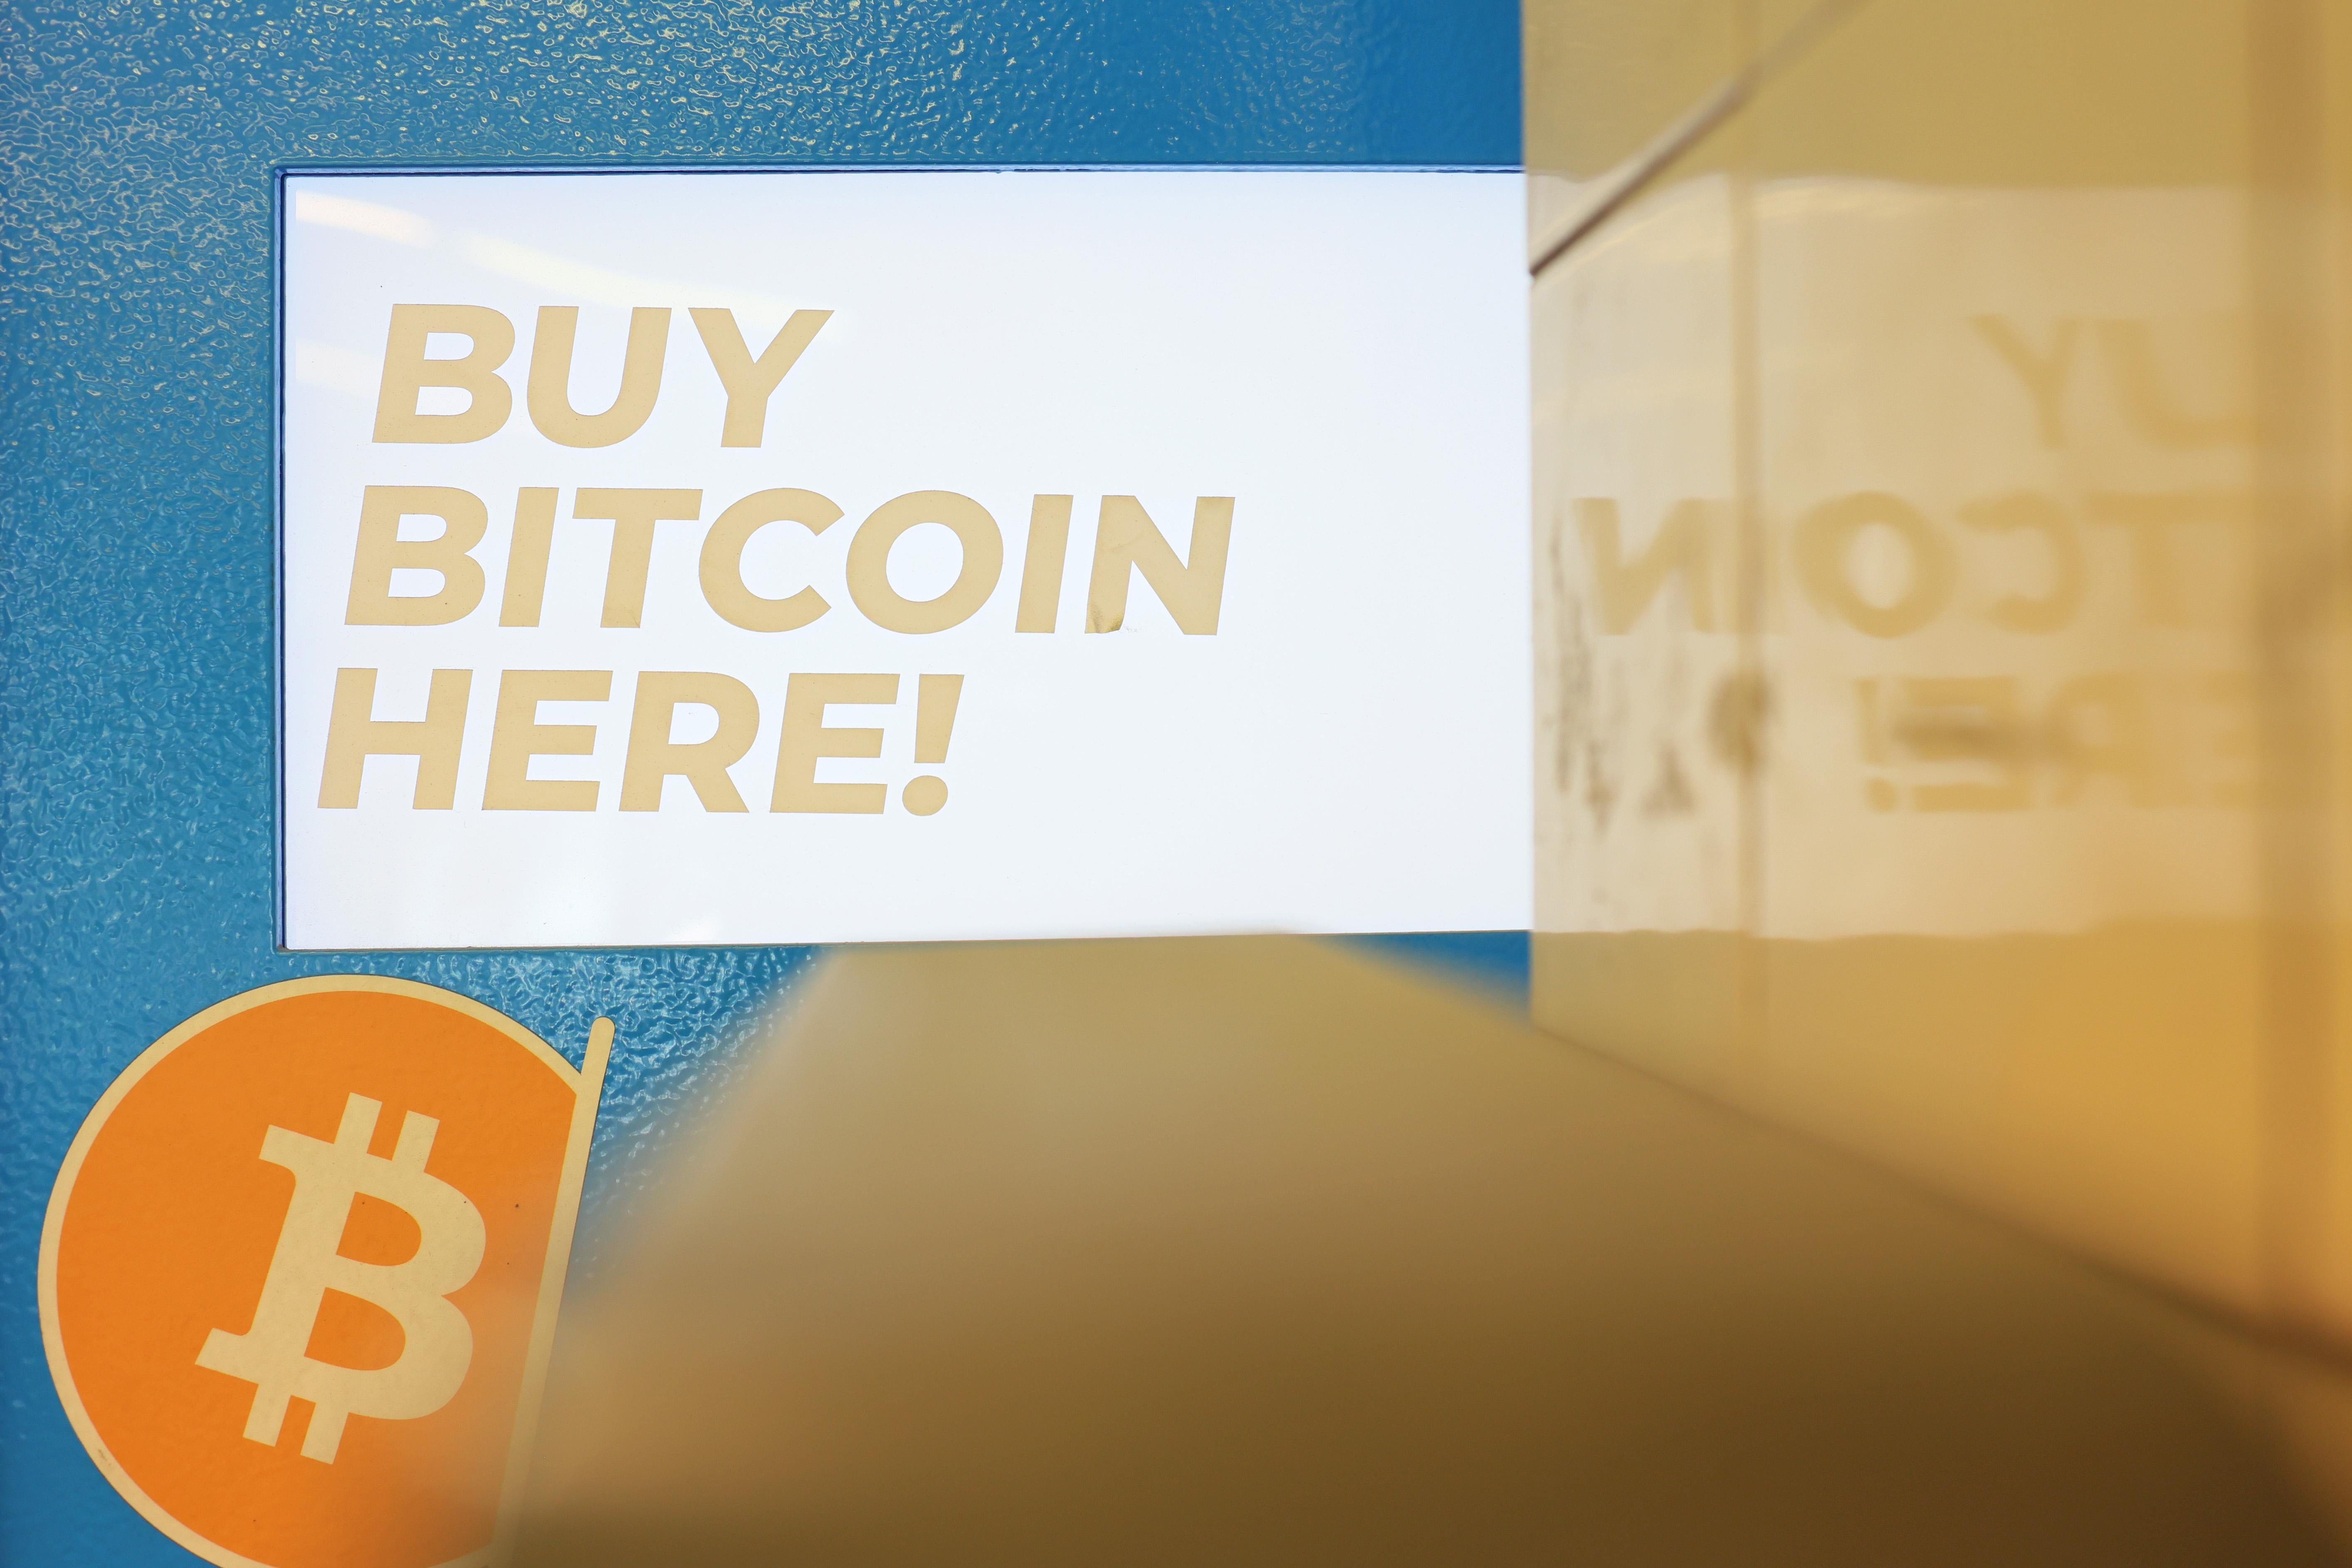 NEW YORK, NEW YORK - JUNE 13: A Bitcoin ATM is seen at the Clark Street subway station on June 13, 2022 in the Brooklyn Heights neighborhood of Brooklyn in New York City. Bitcoin fell below $24,000 this morning to its lowest level since December 2020. The crypto market lost more than $200 billion since Friday, with the entire market falling below $1 trillion for the first time since February 2021, according to data from CoinMarketCap. (Photo by Michael M. Santiago/Getty Images)